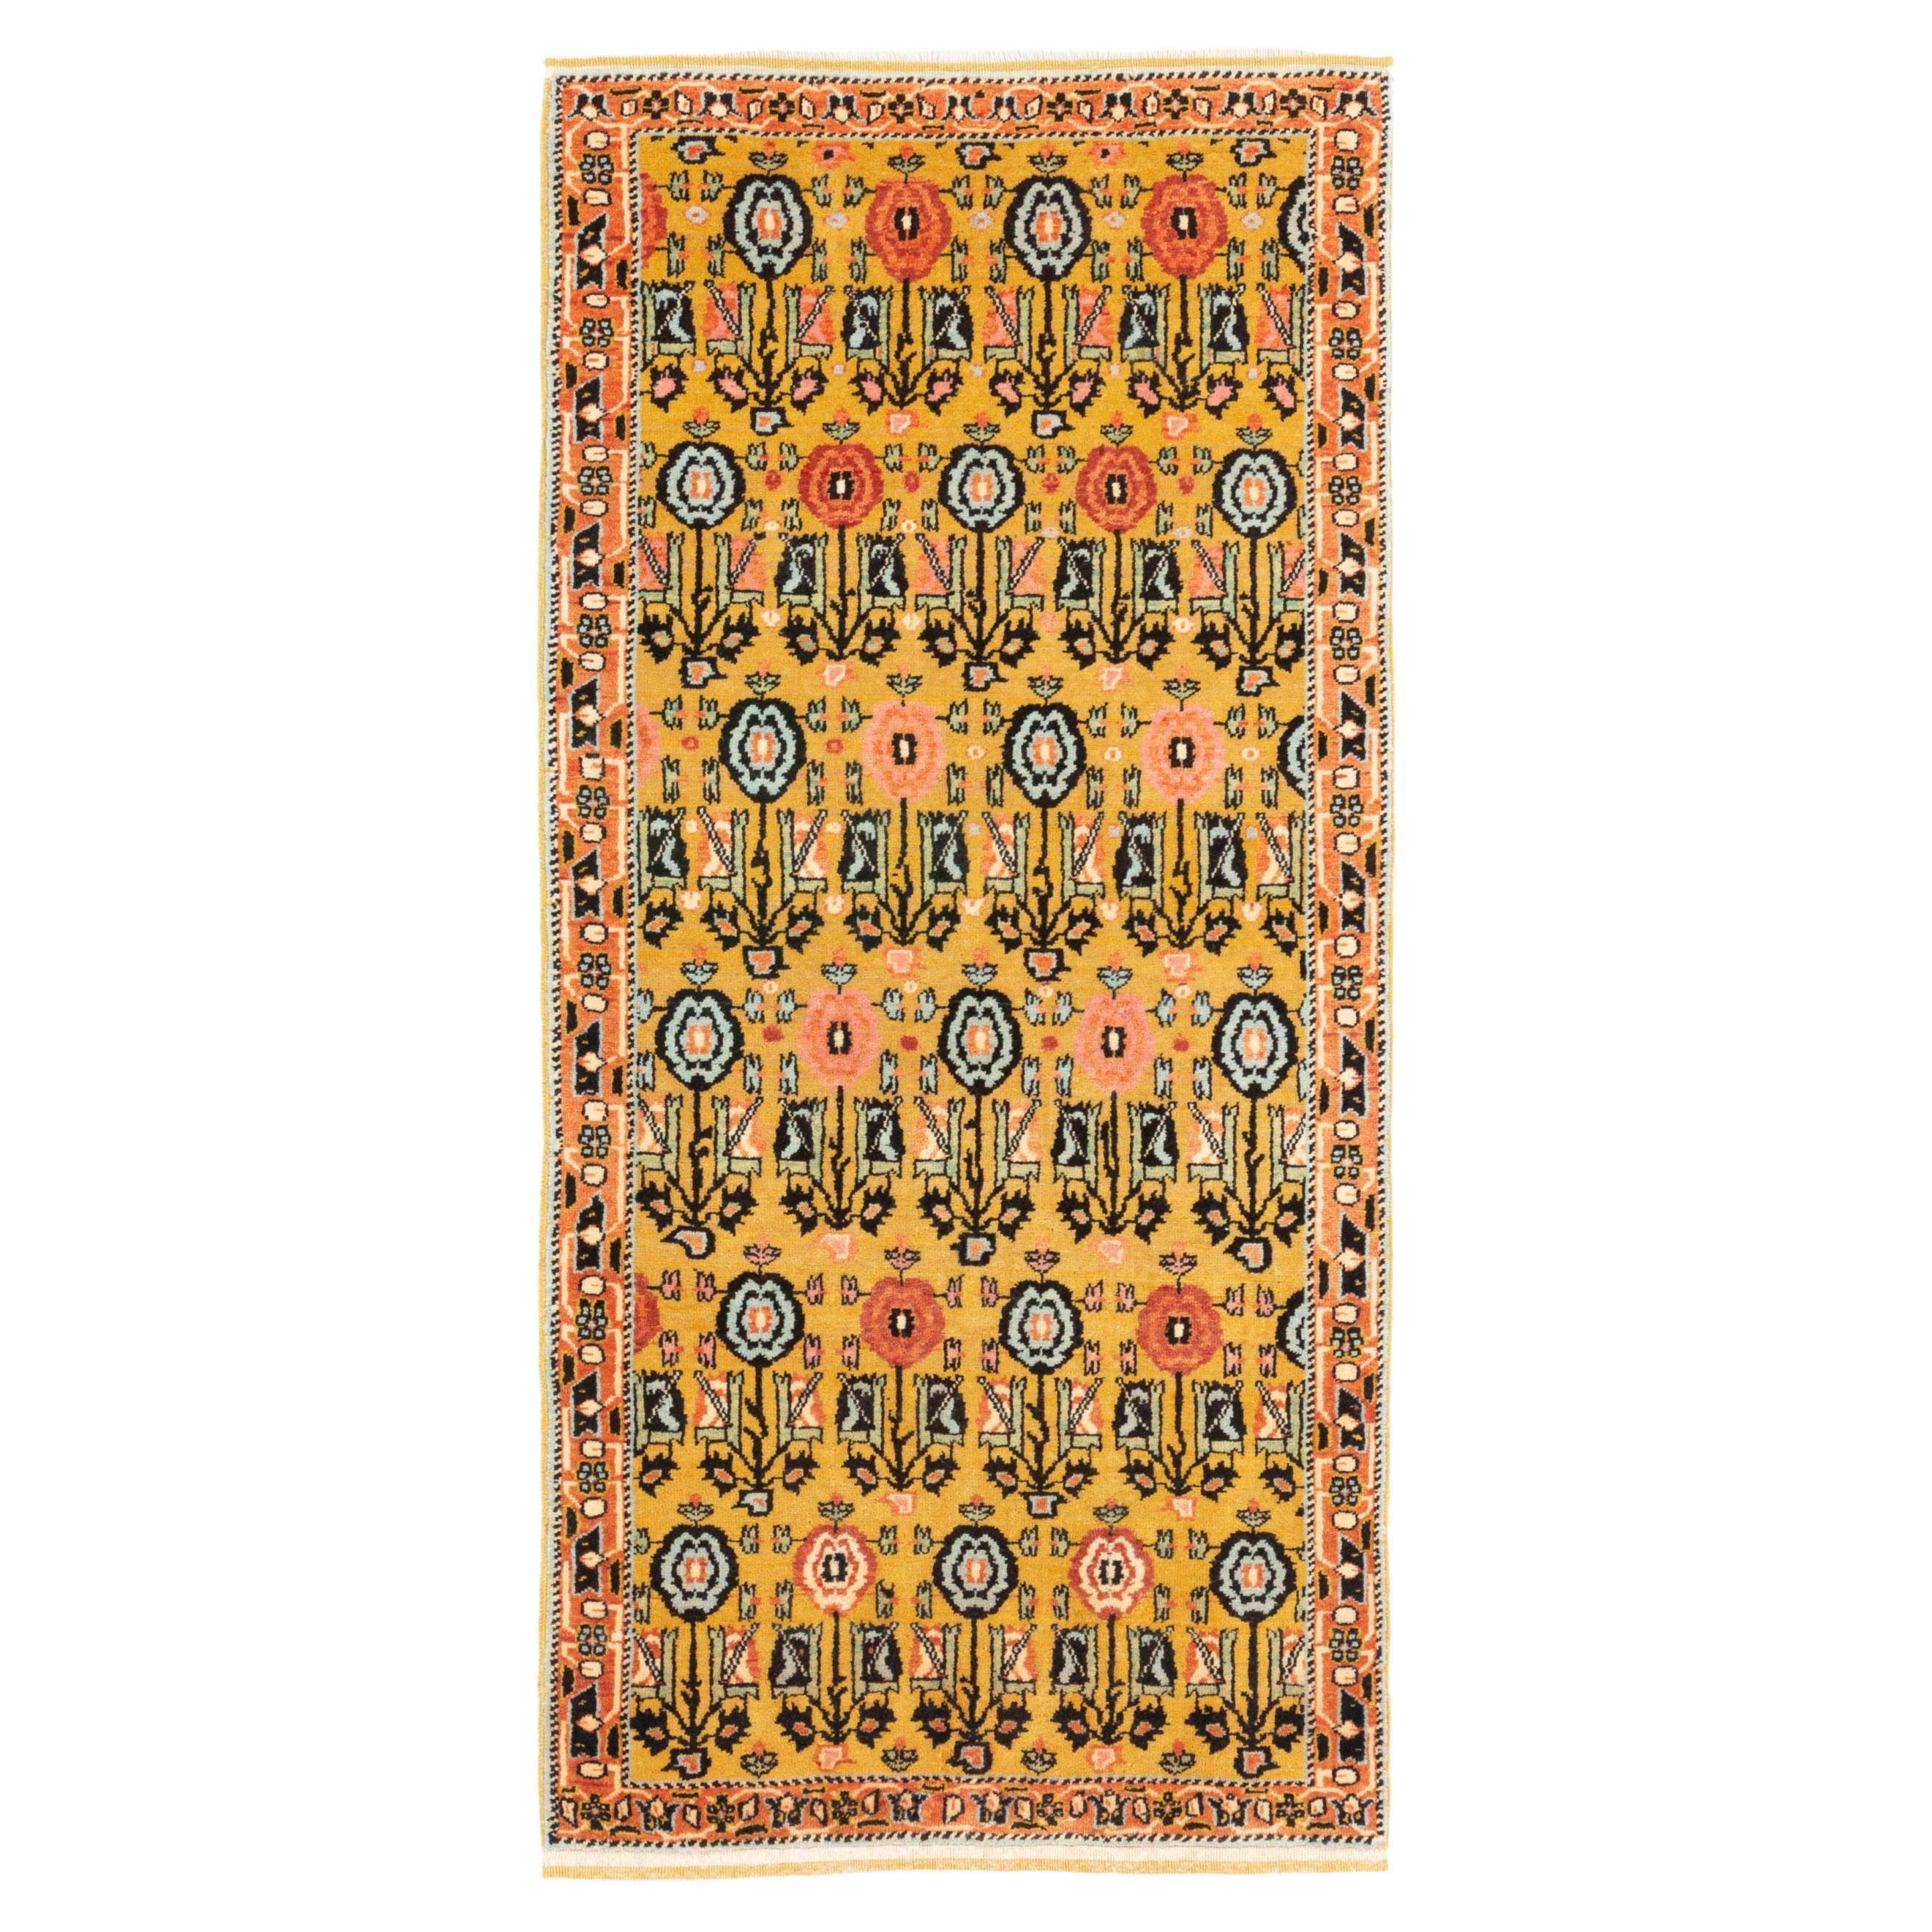 Ararat Rugs Senna Rows of Flowers Rug, 19th Century Revival Carpet Natural Dyed For Sale